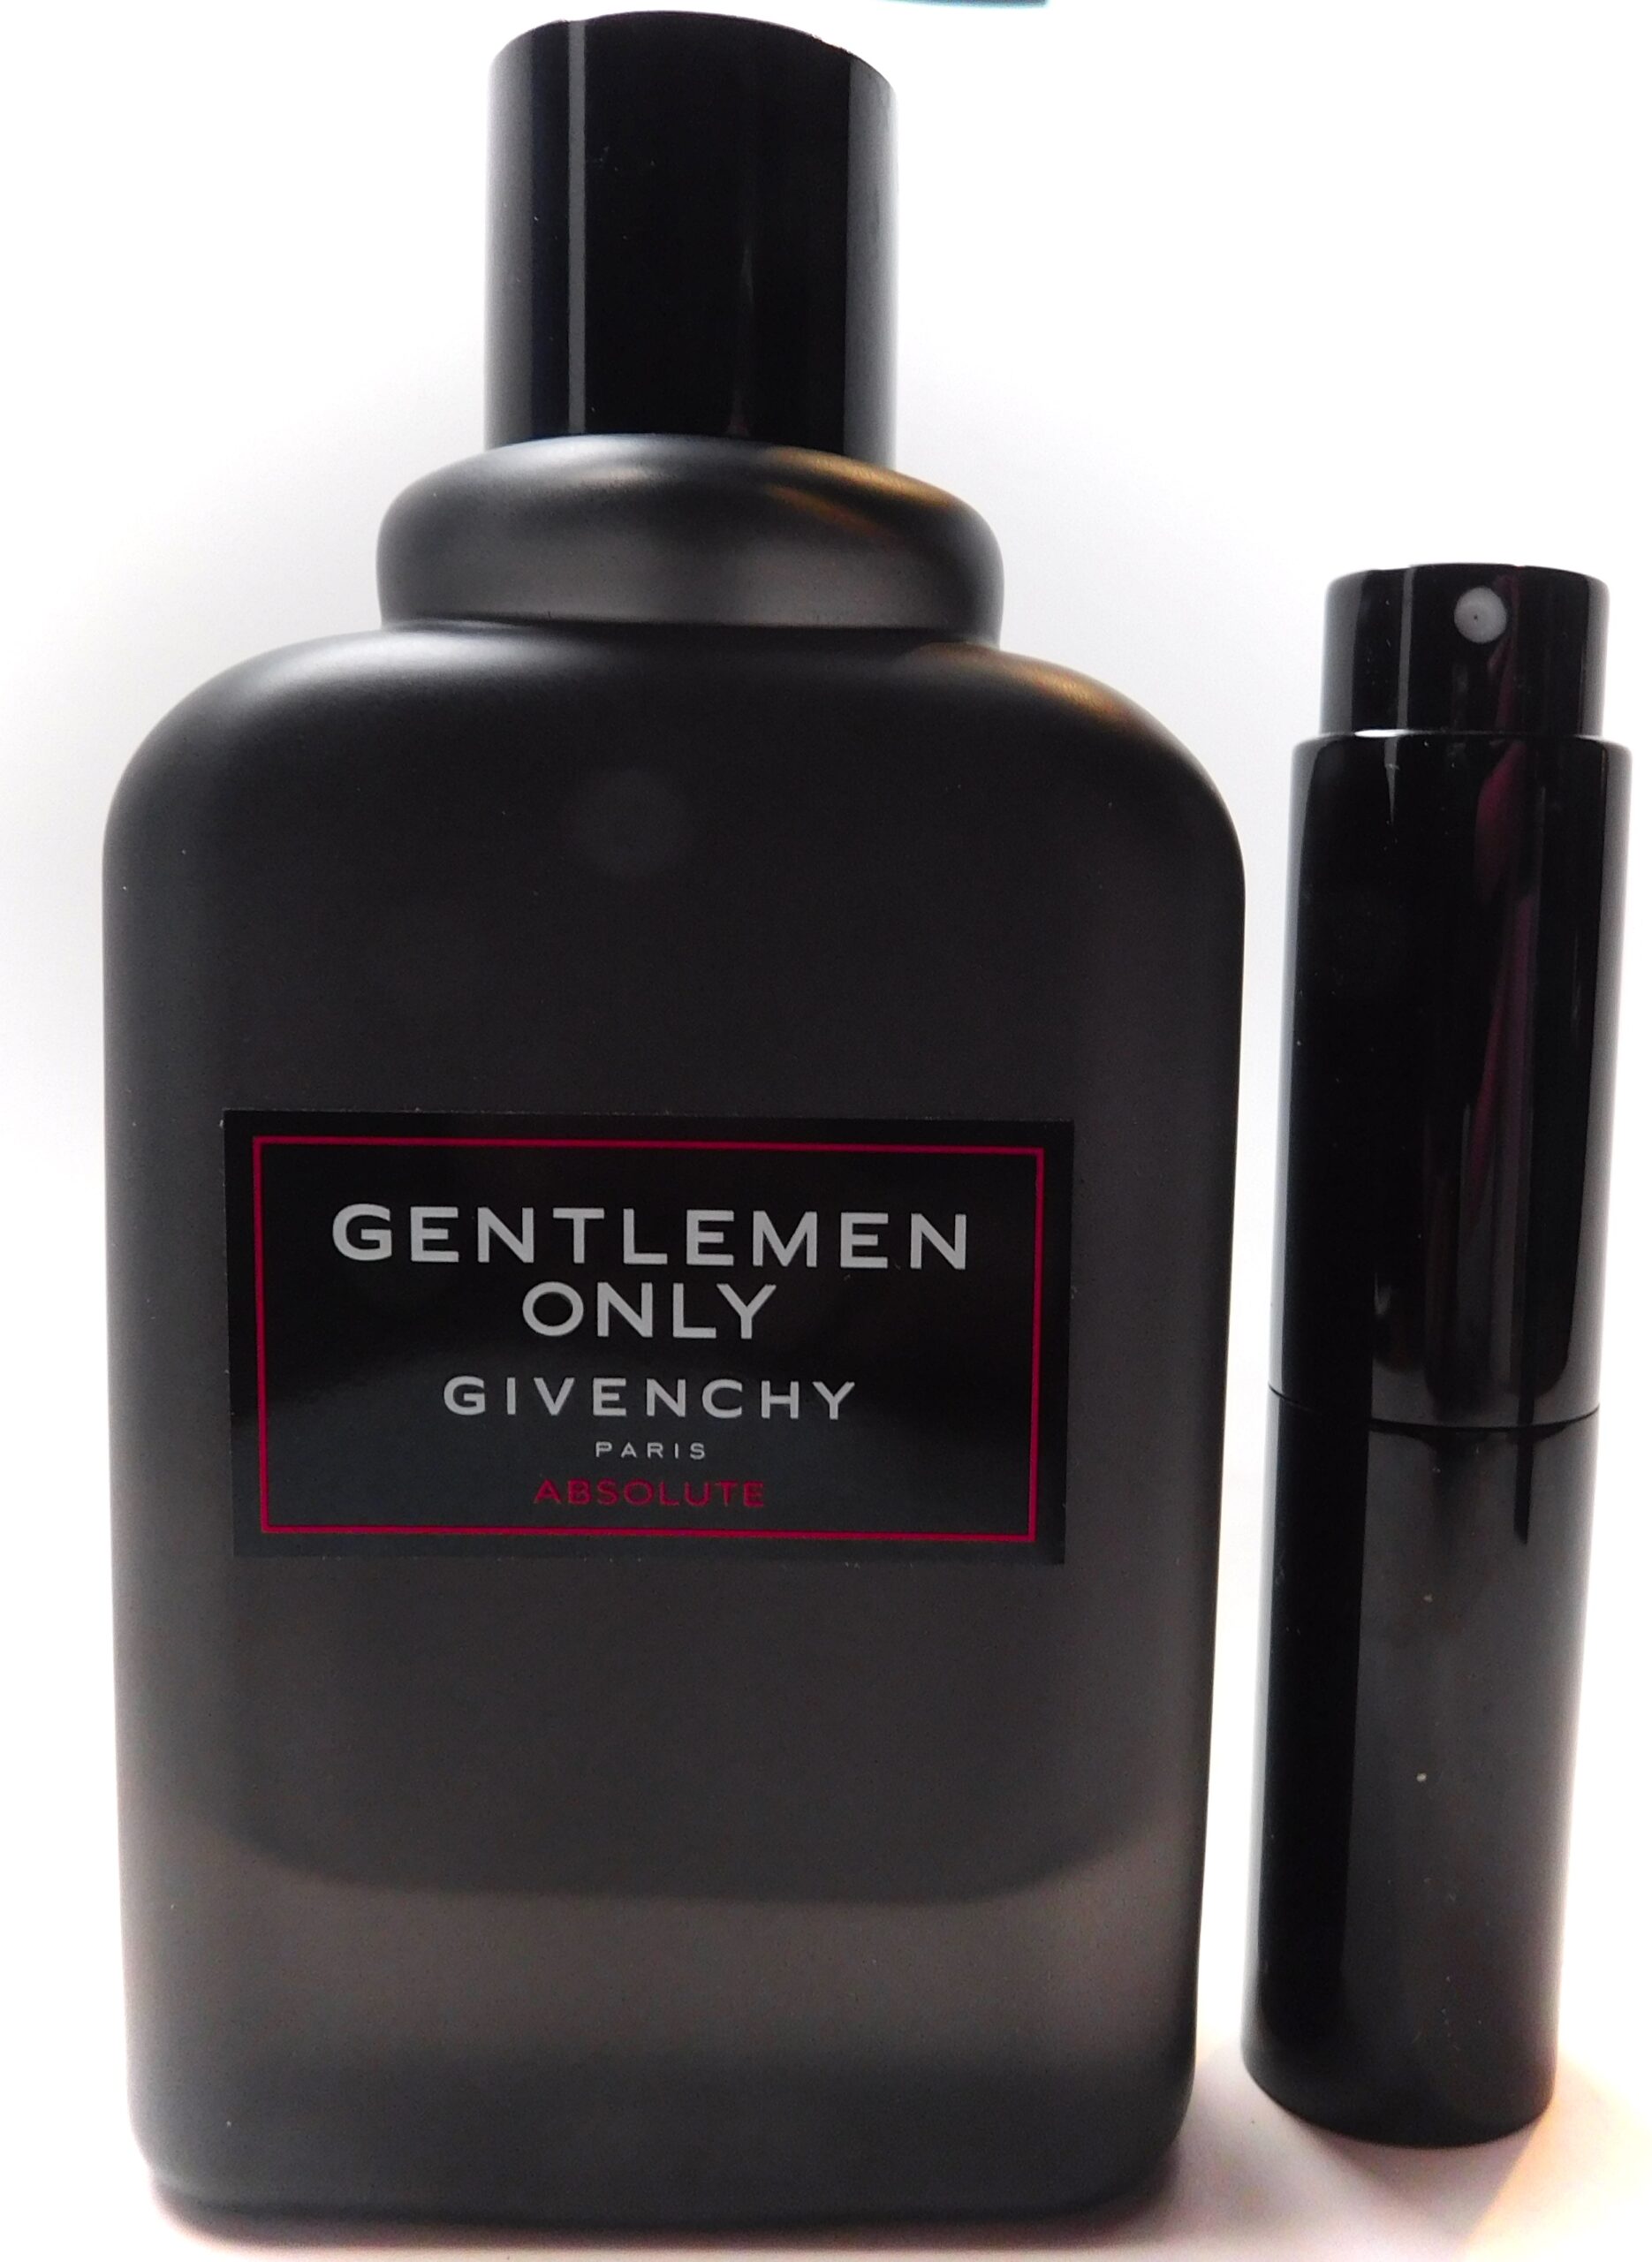 Givenchy Gentleman Only absolute 8ml Travel atomizer cologne spray eau ...